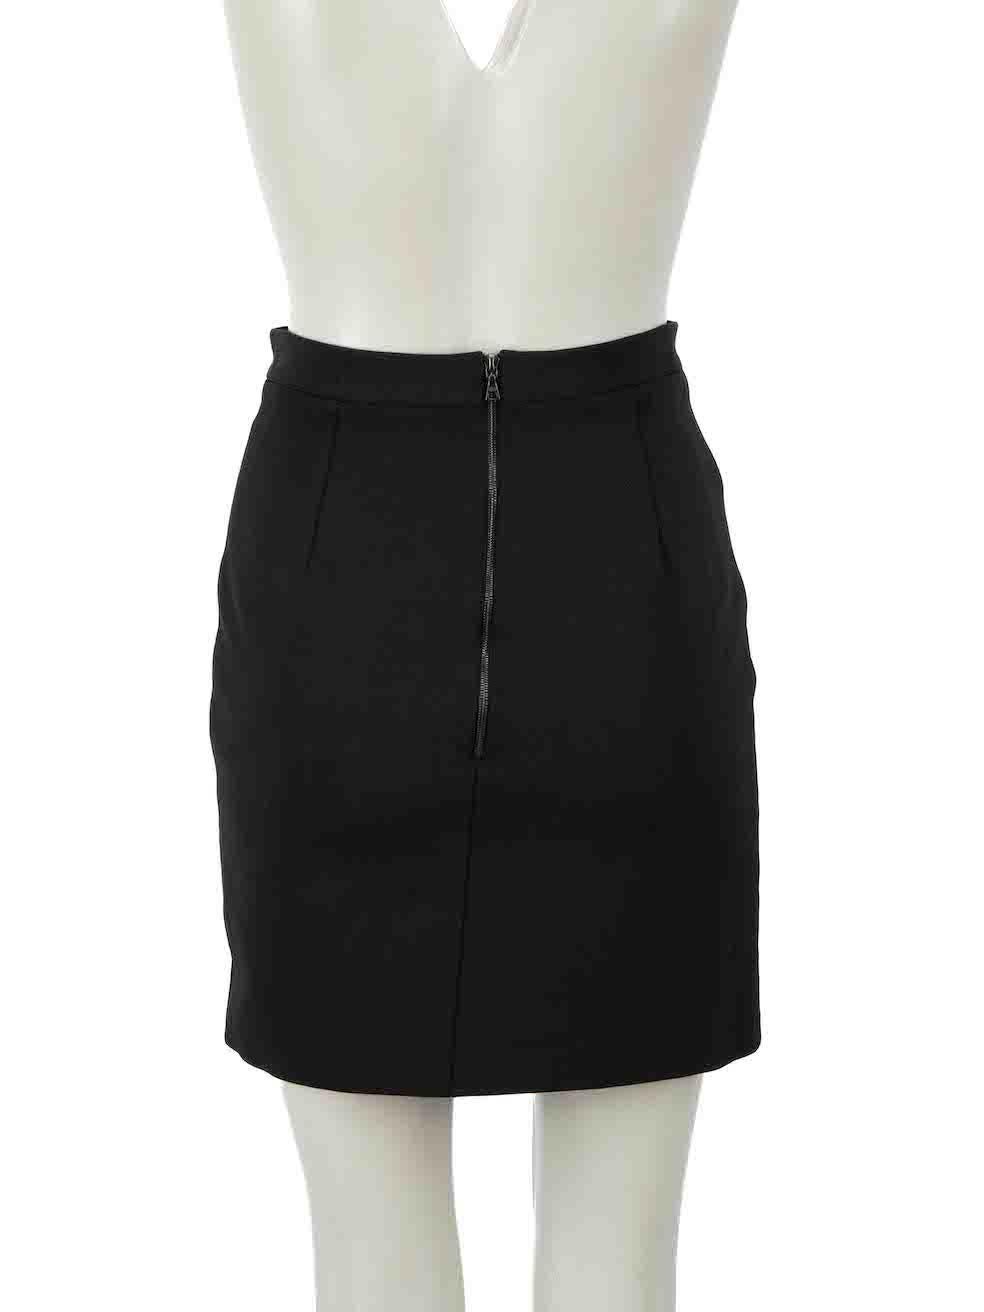 David Koma Black Tailored Mini Skirt Size S In Excellent Condition In London, GB